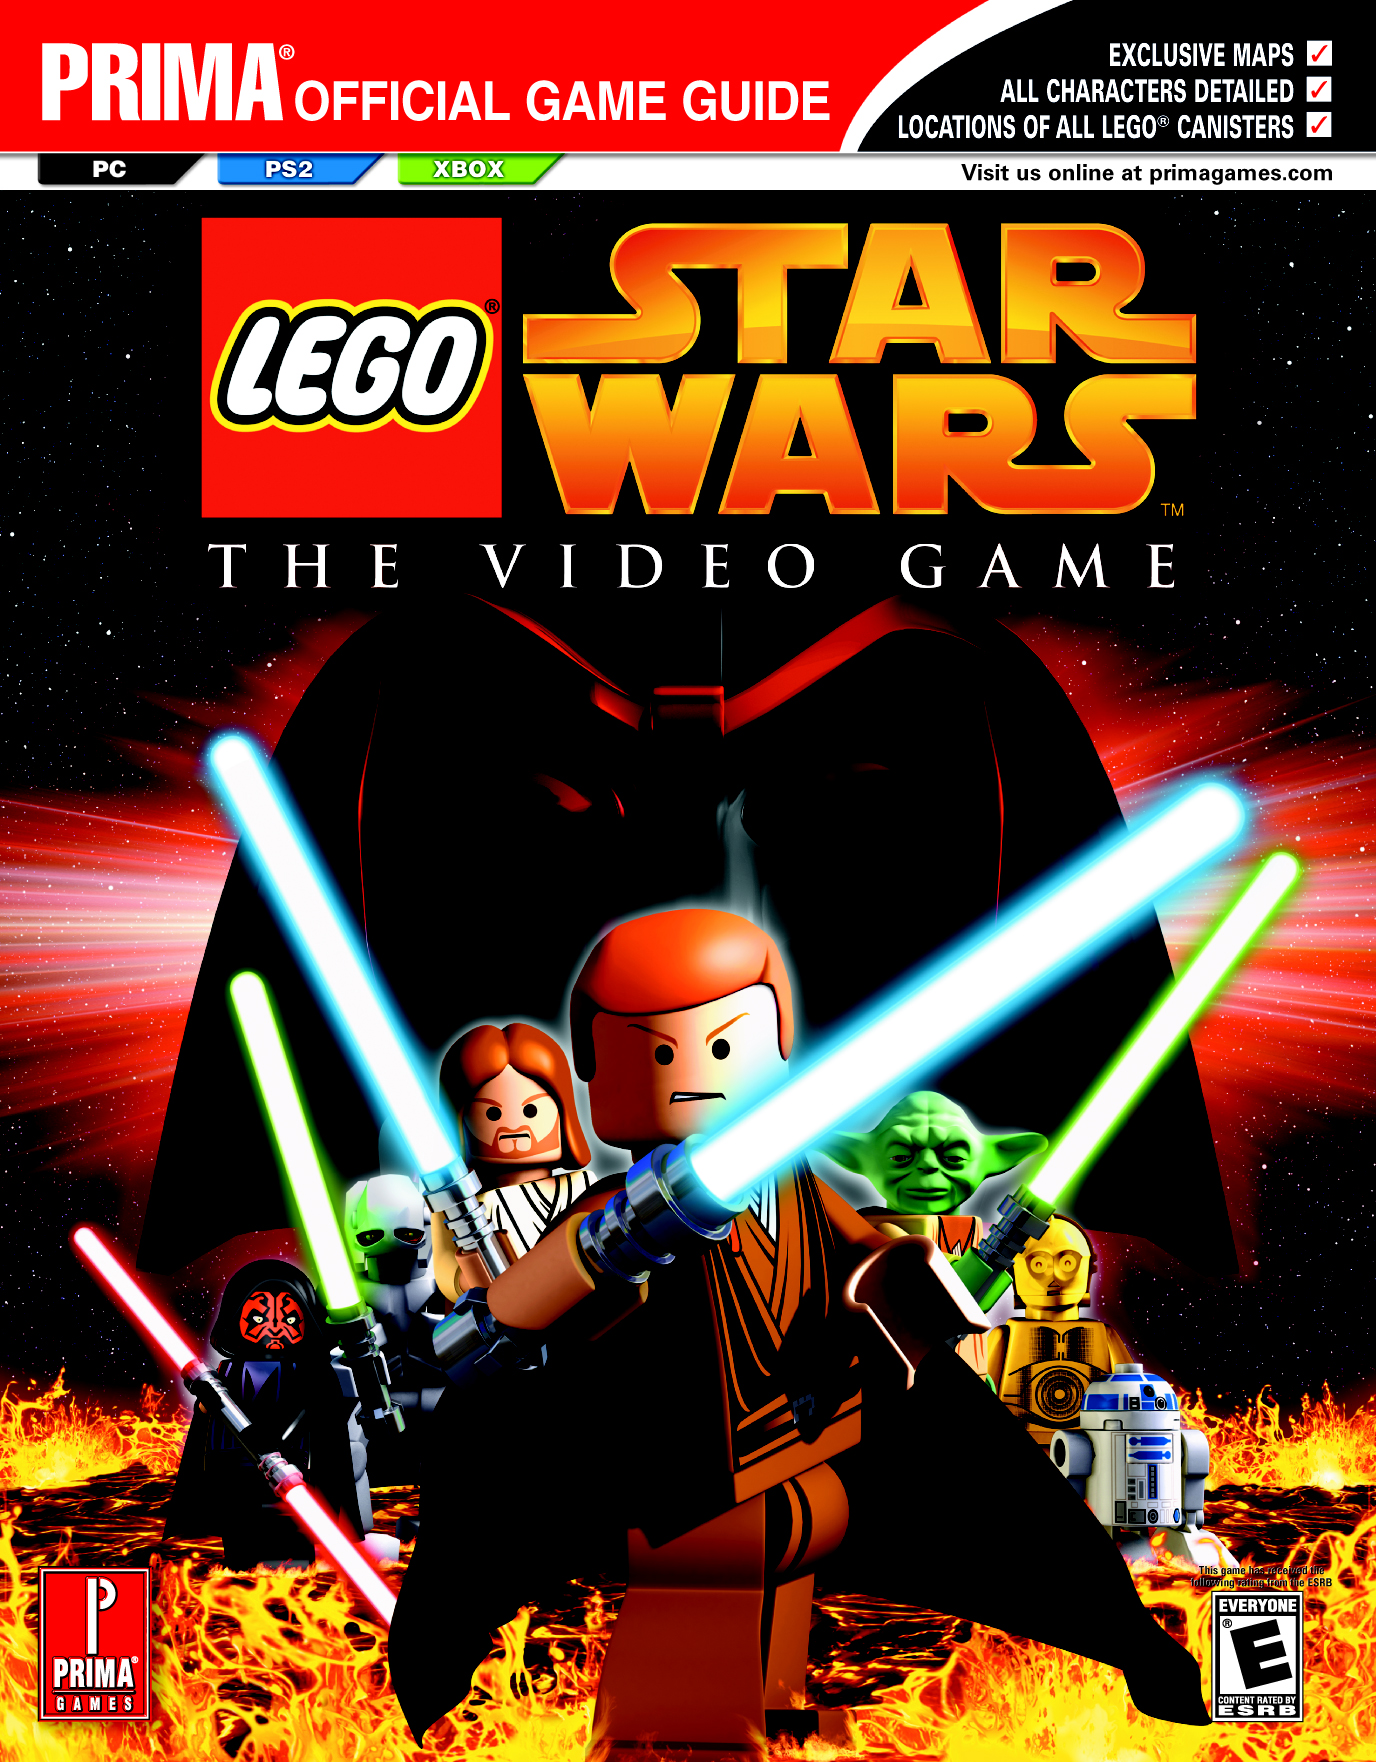 LEGO Star Wars: The Video Game #20